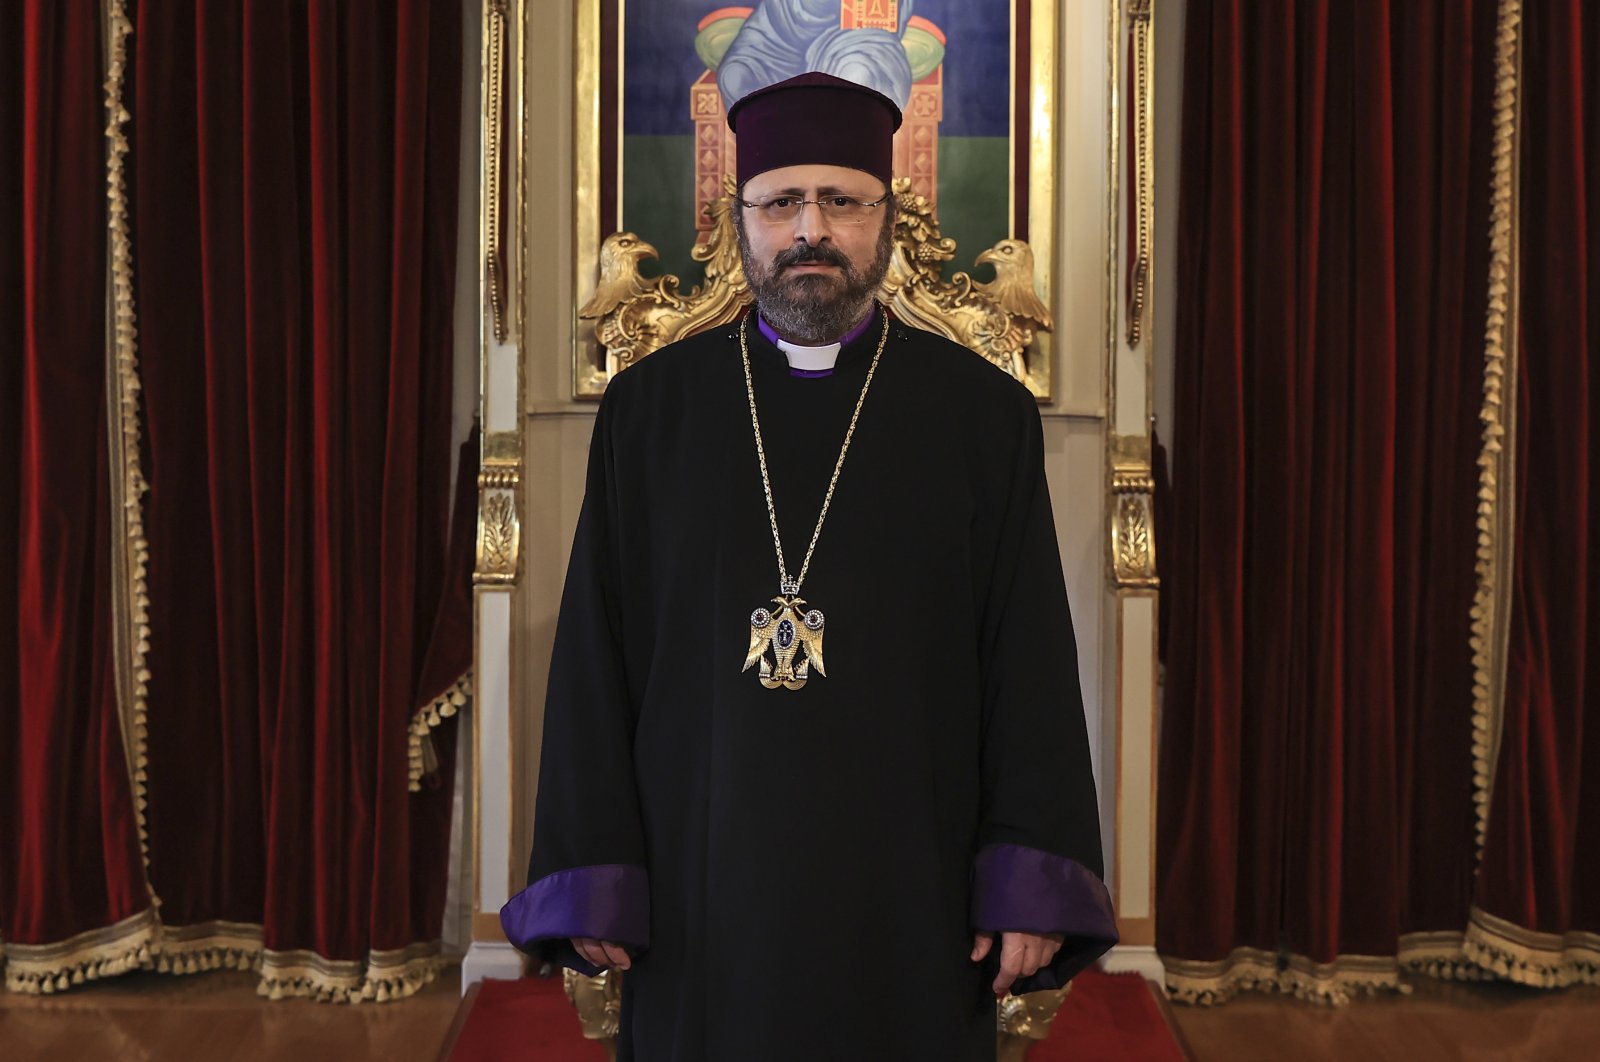 The Armenian Orthodox Patriarch Sahak Maşalyan during an interview with AA in Istanbul, Turkey, April 23, 2021. (AA)